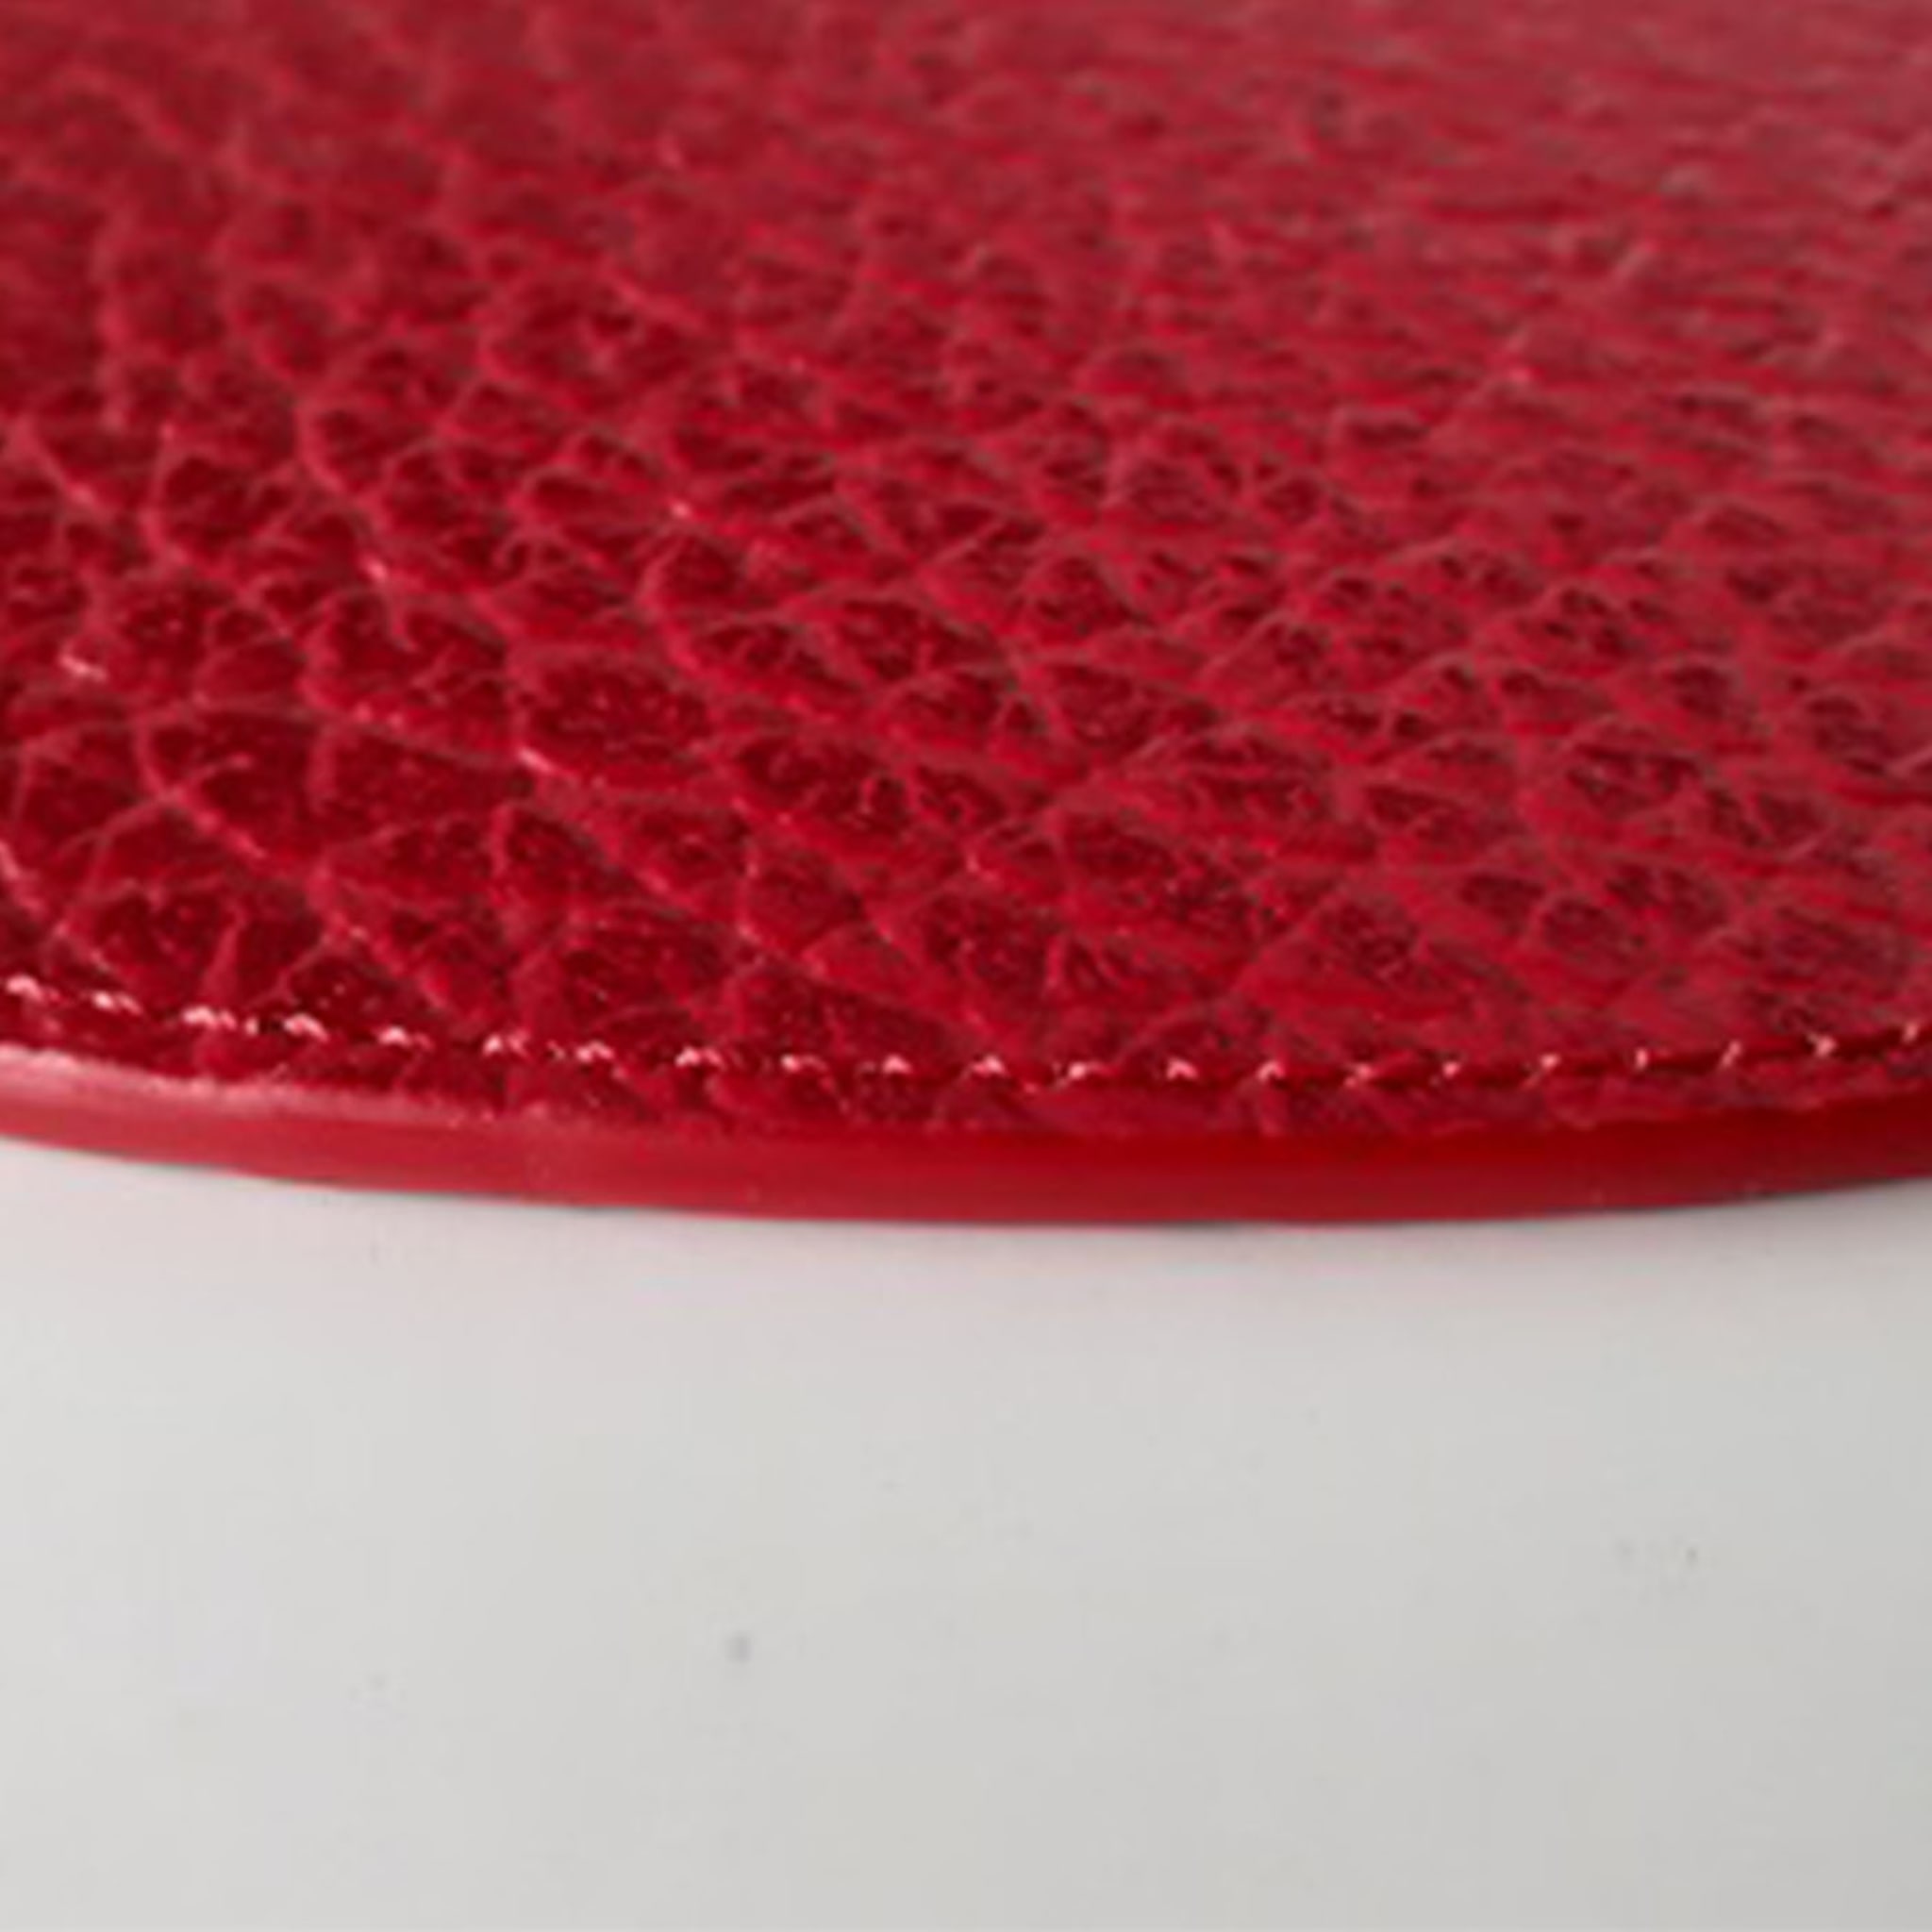 Tanzania Extra-Small Set of 2 Red Leather Placemats - Alternative view 5